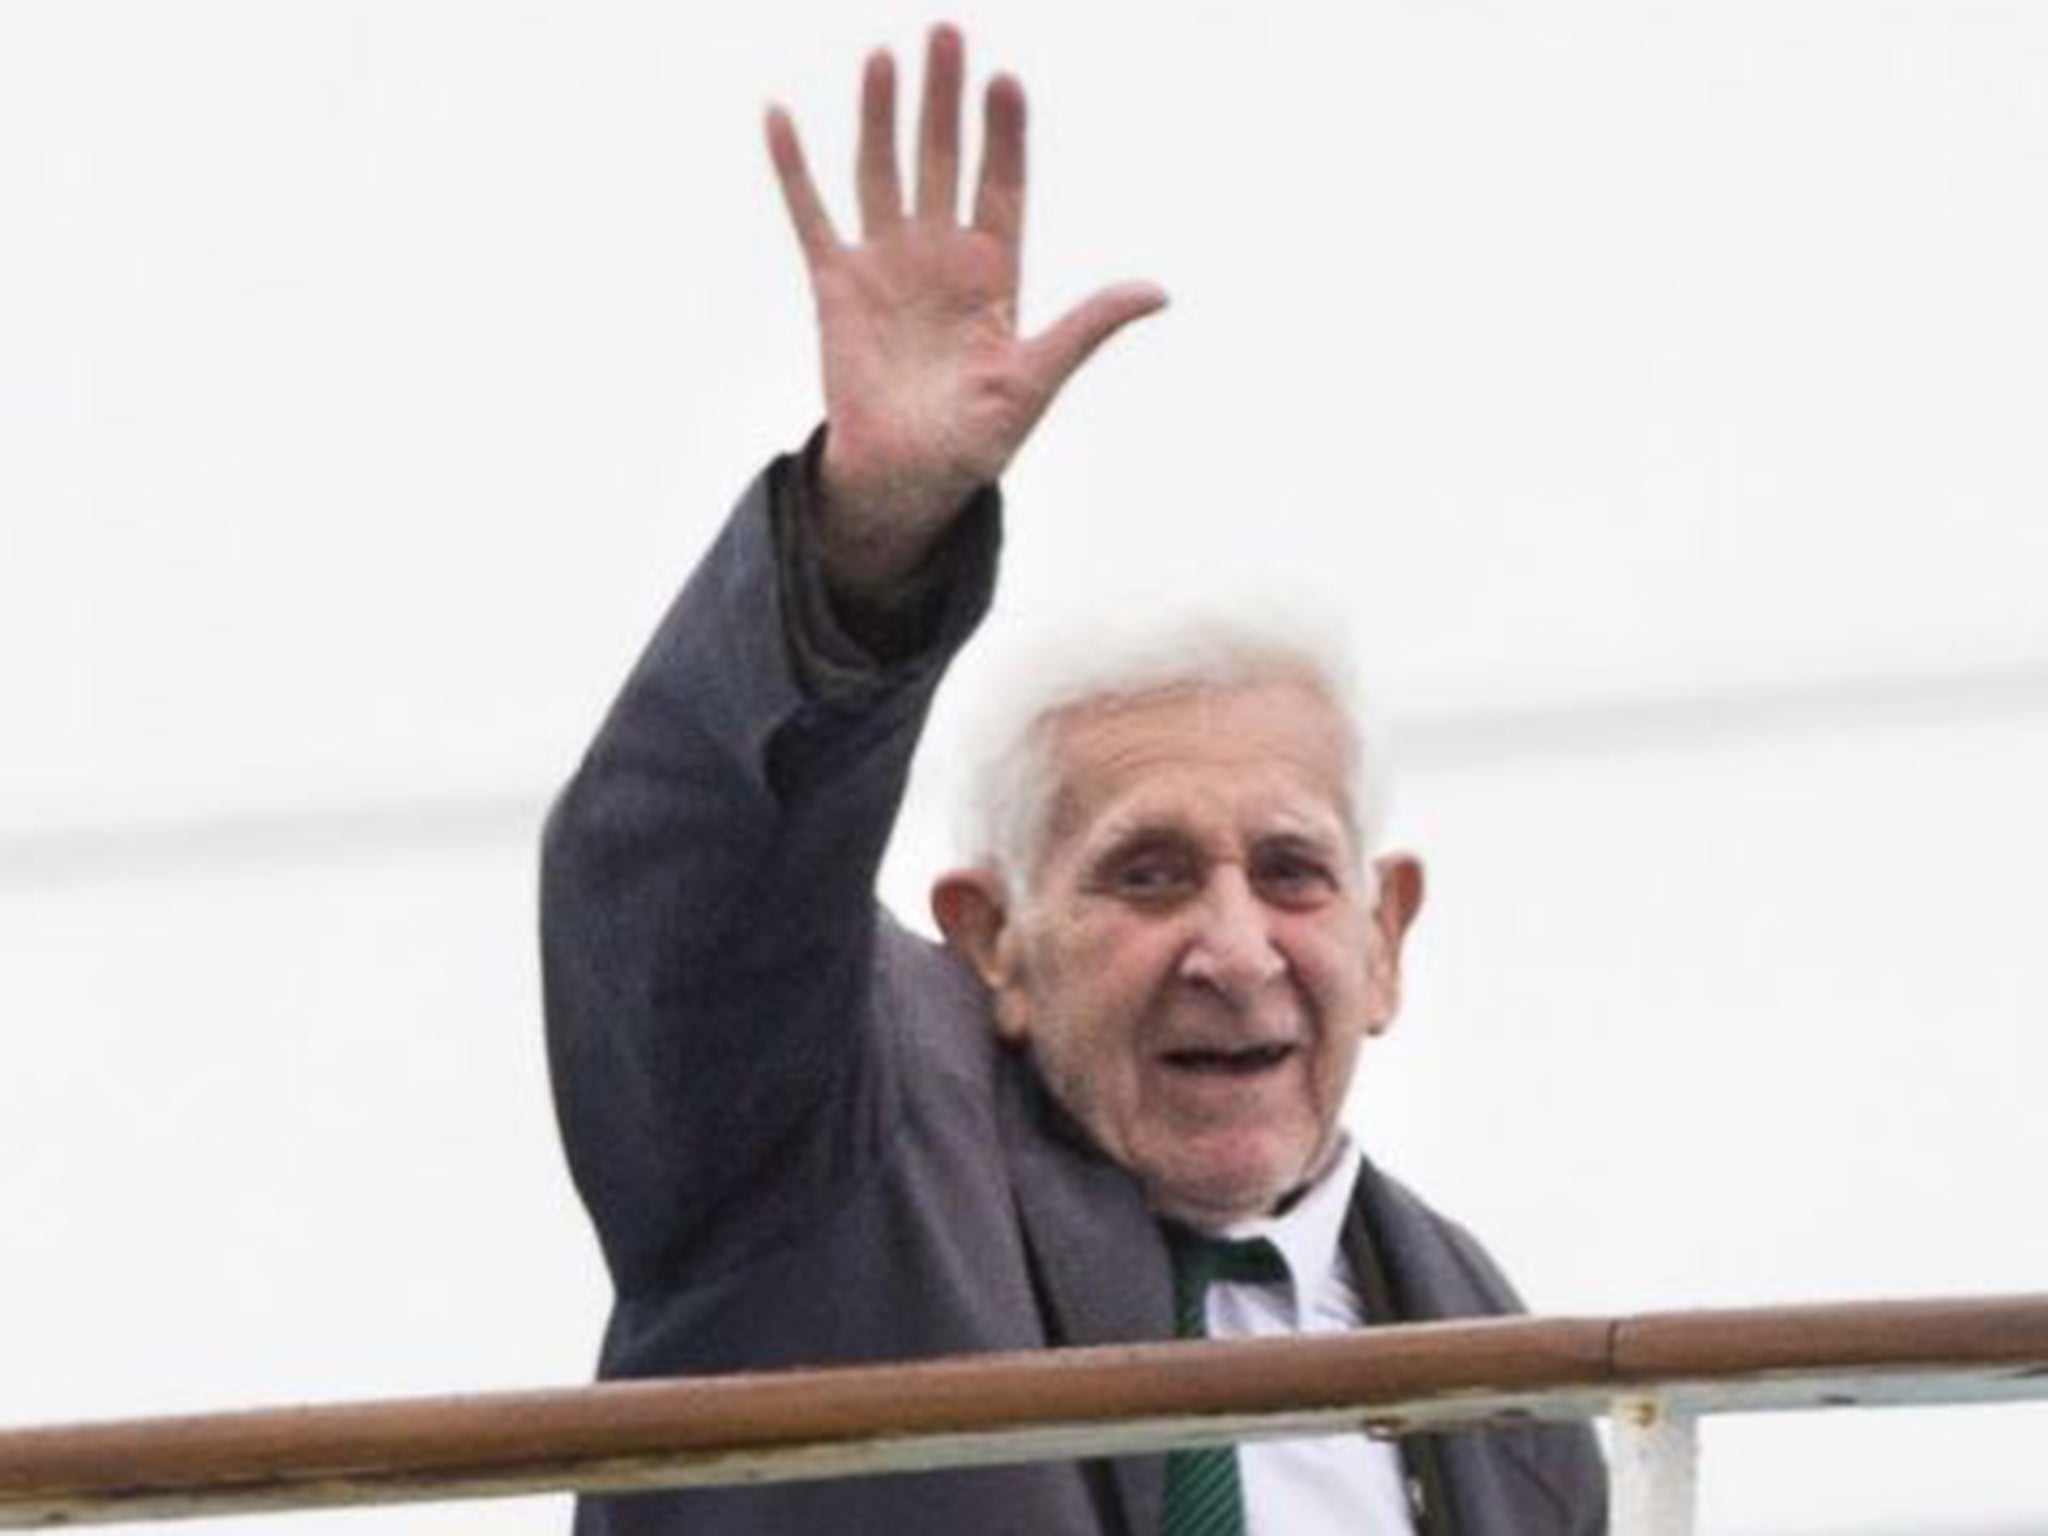 Jordan boards the ferry on his way home from Normandy in June 2014